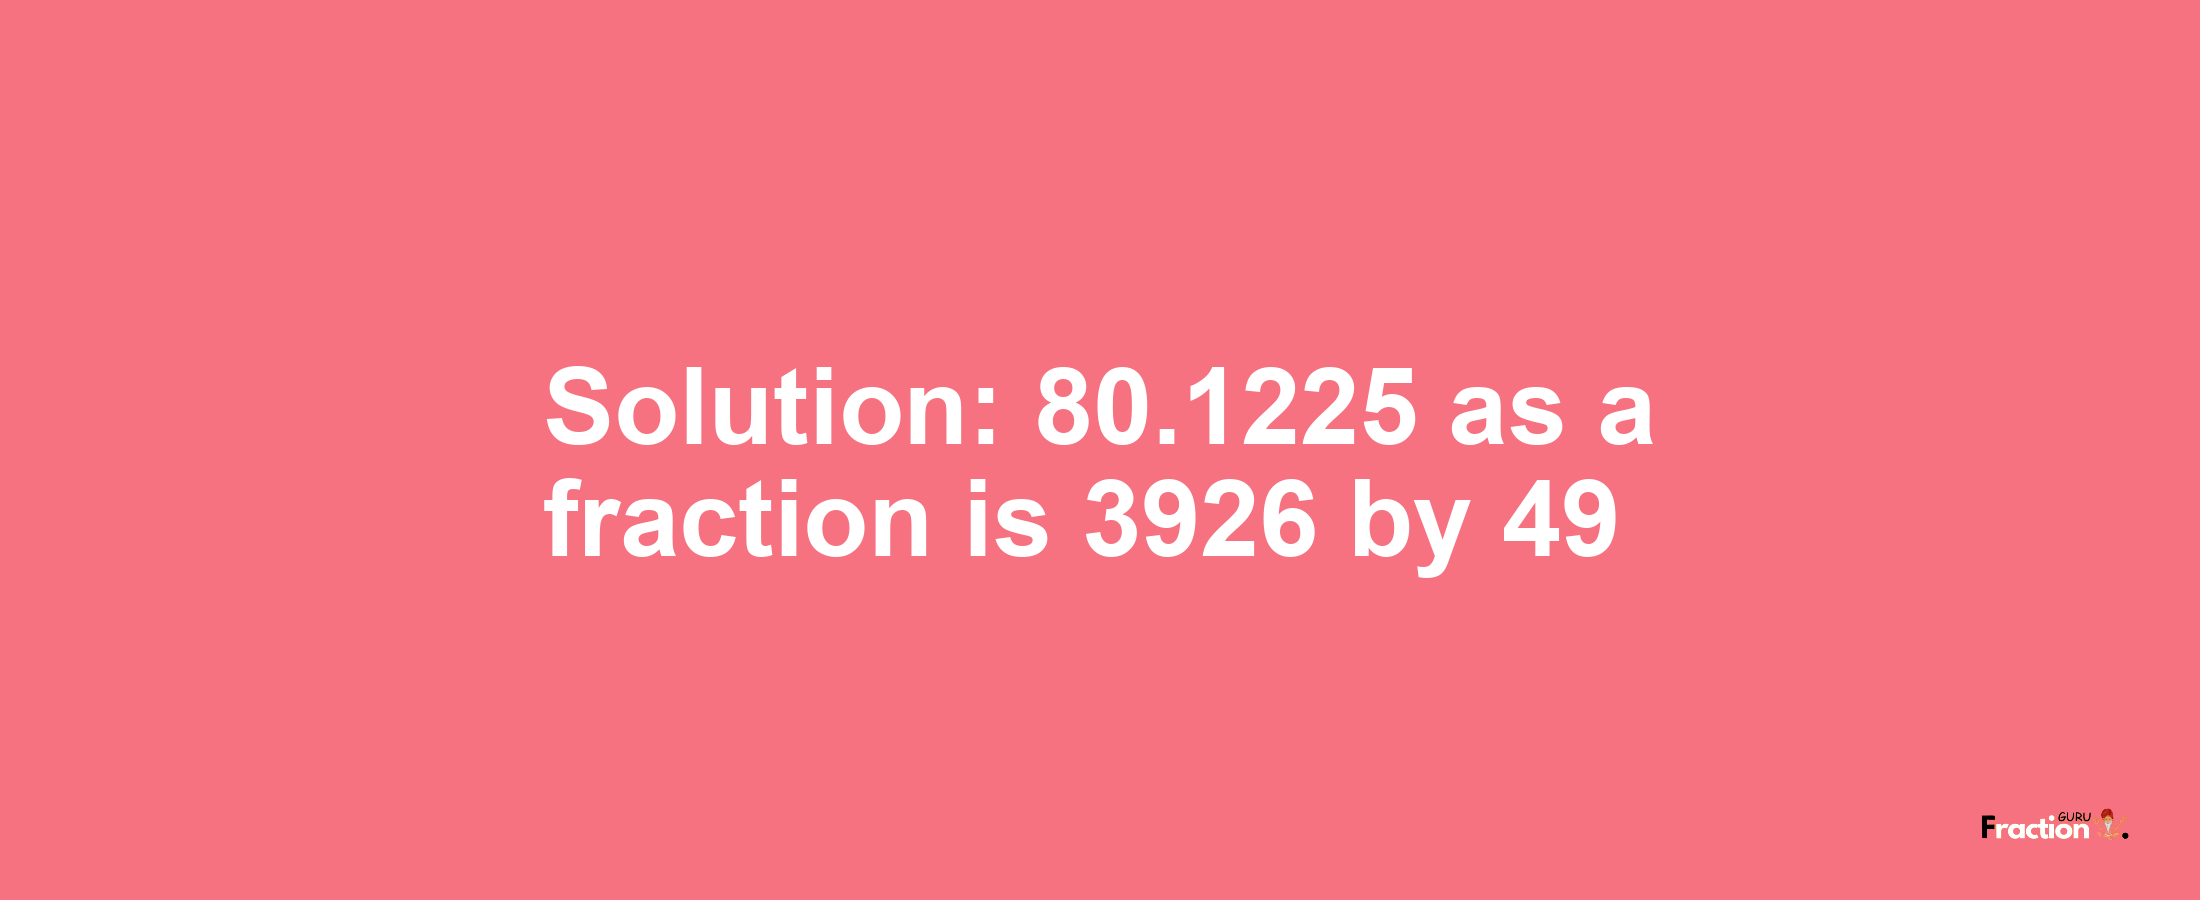 Solution:80.1225 as a fraction is 3926/49